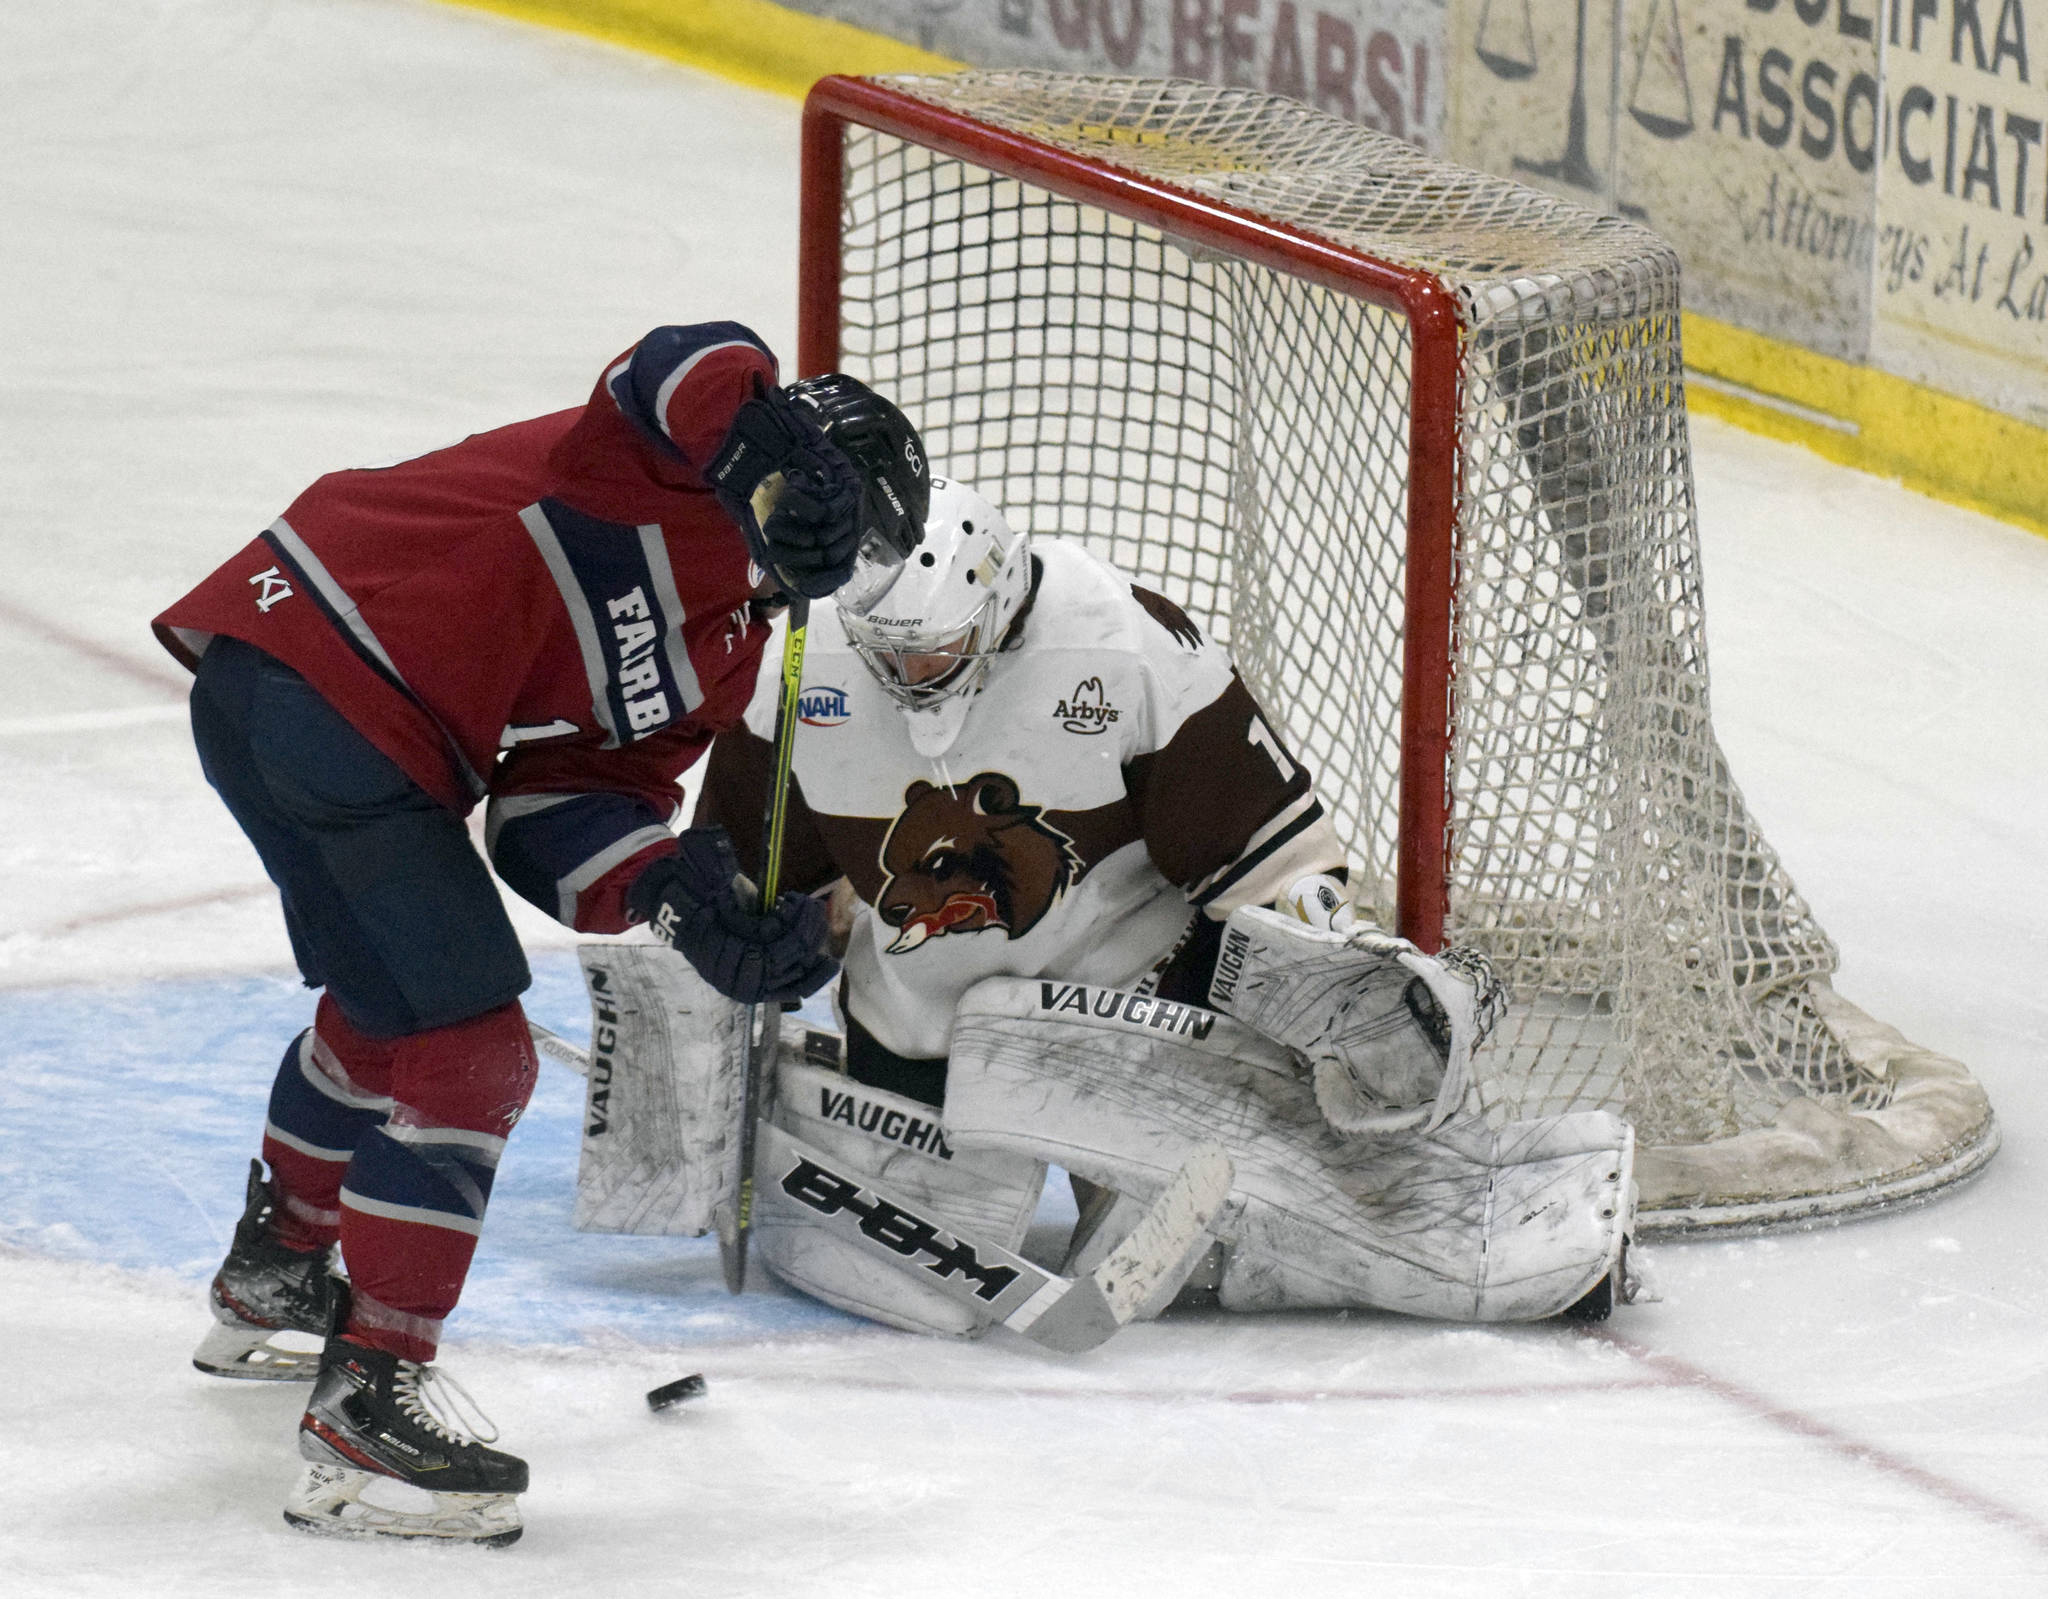 Laker Aldridge of the Fairbanks Ice Dogs tries to solve Kenai River Brown Bears goalie Luke Pavicich on Friday, May 14, 2021, at the Soldotna Regional Sports Complex in Soldotna, Alaska. (Photo by Jeff Helminiak/Peninsula Clarion)